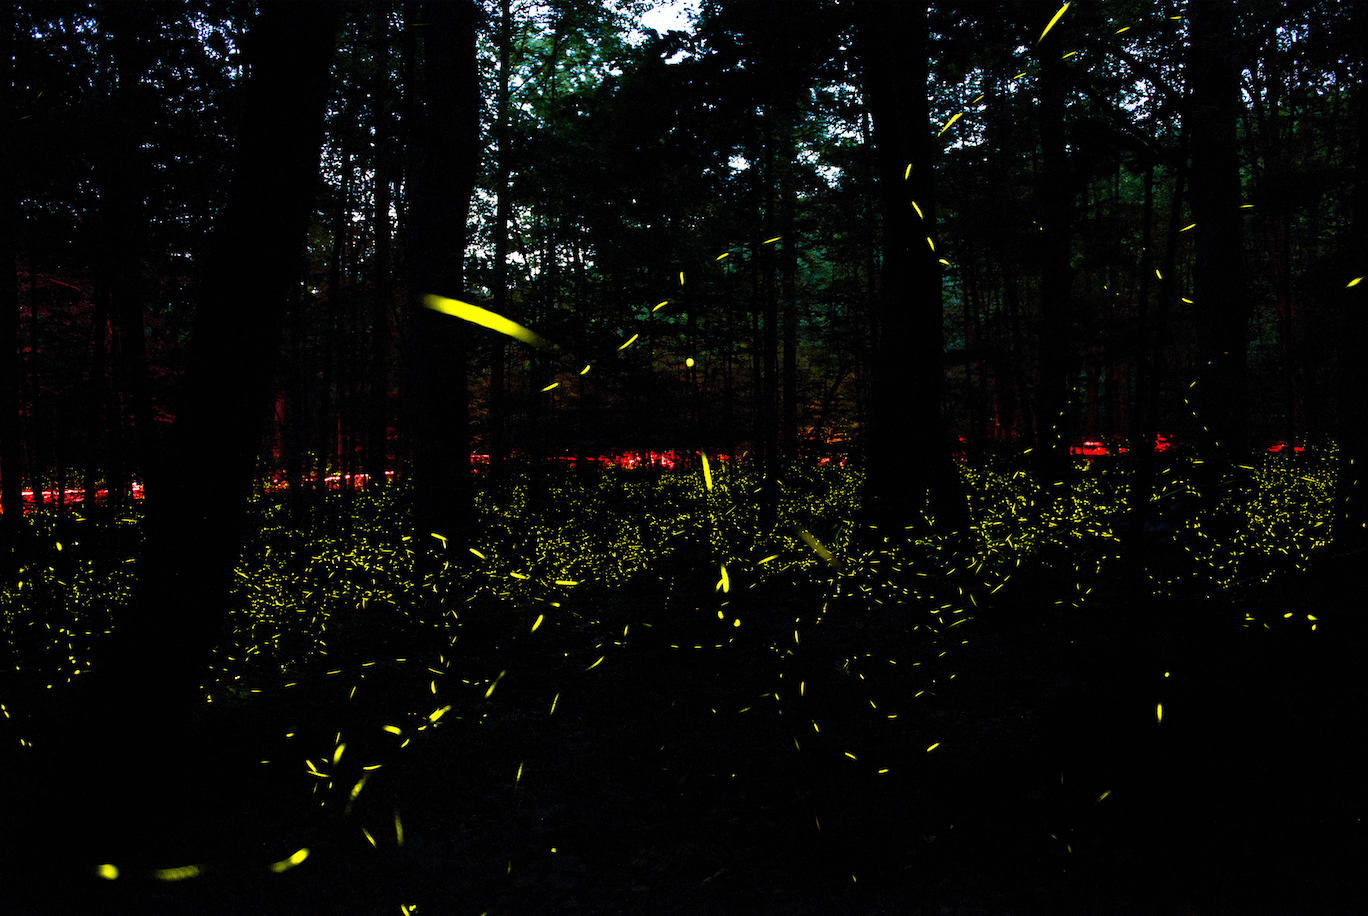 Best Place to See Synchronous Fireflies - View 2